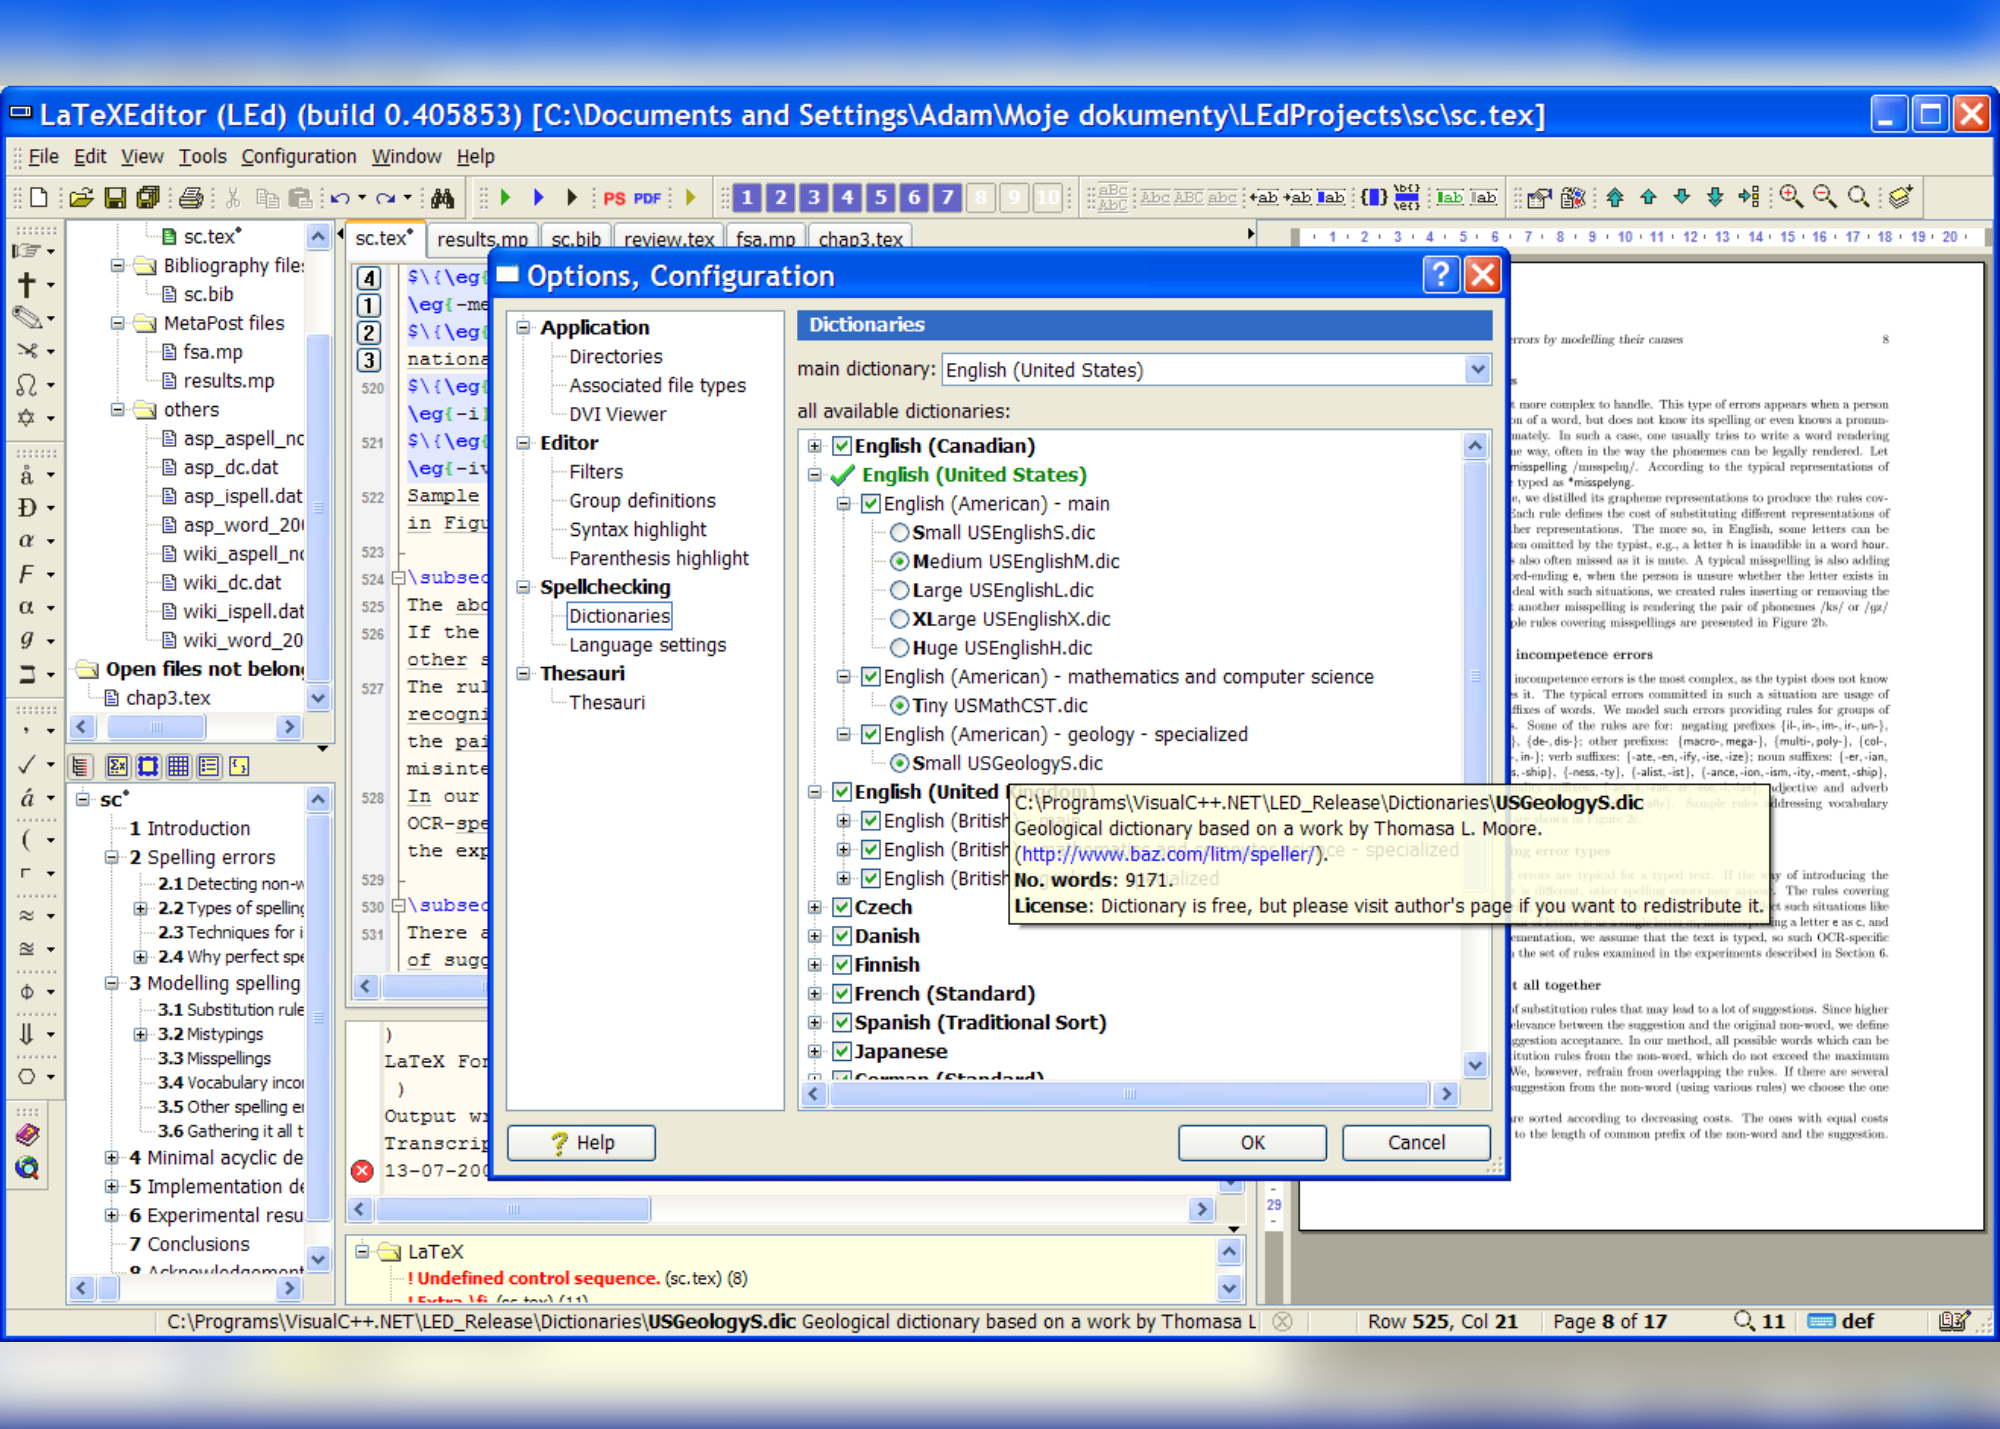 A screenshot showing variety of available dictionaries